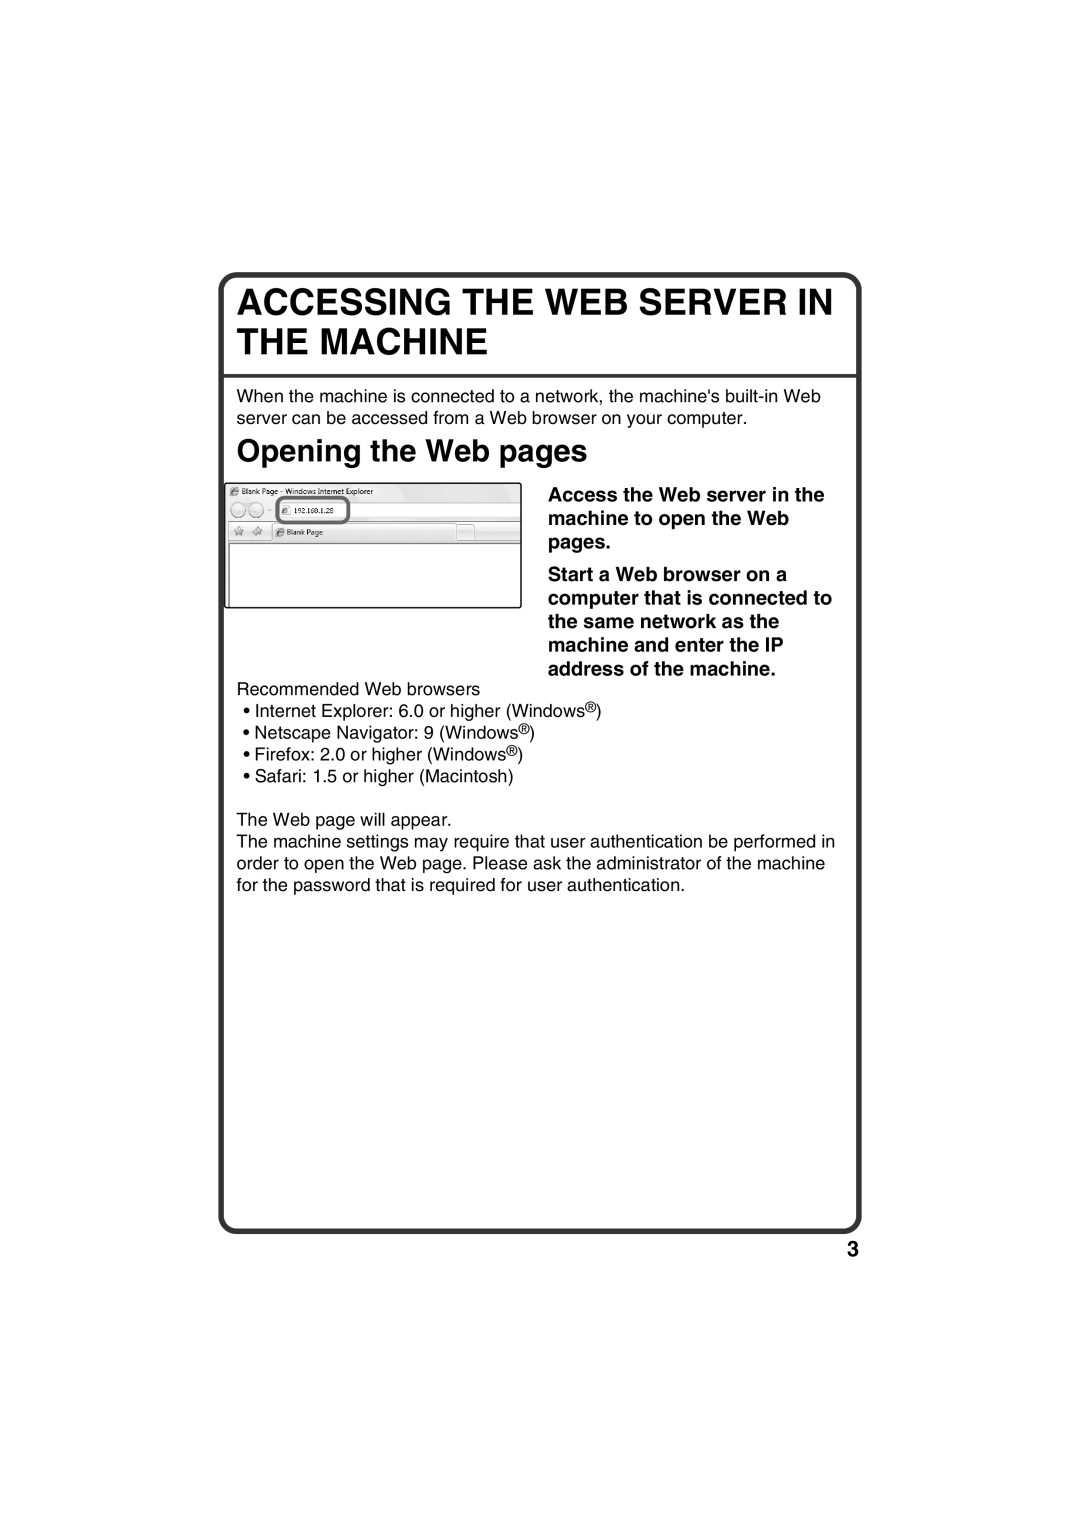 Sharp TINSE4377FCZZ, MX-B401 quick start Accessing The Web Server In The Machine, Opening the Web pages 